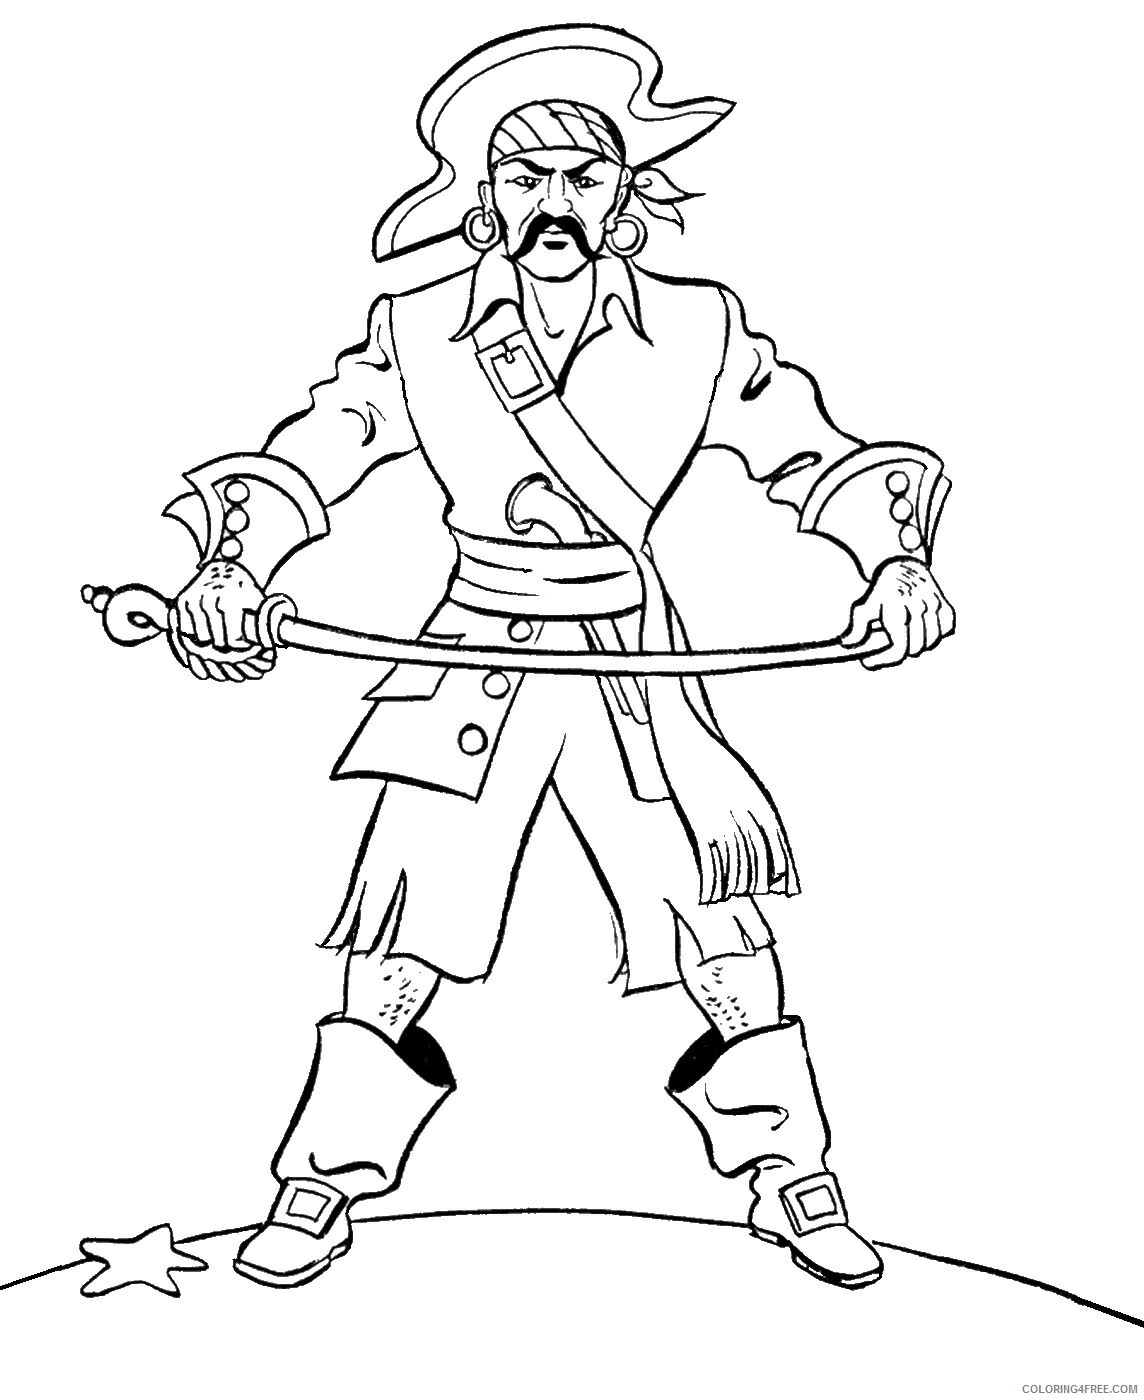 Pirates Coloring Pages for boys piratec59 Printable 2020 0738 Coloring4free